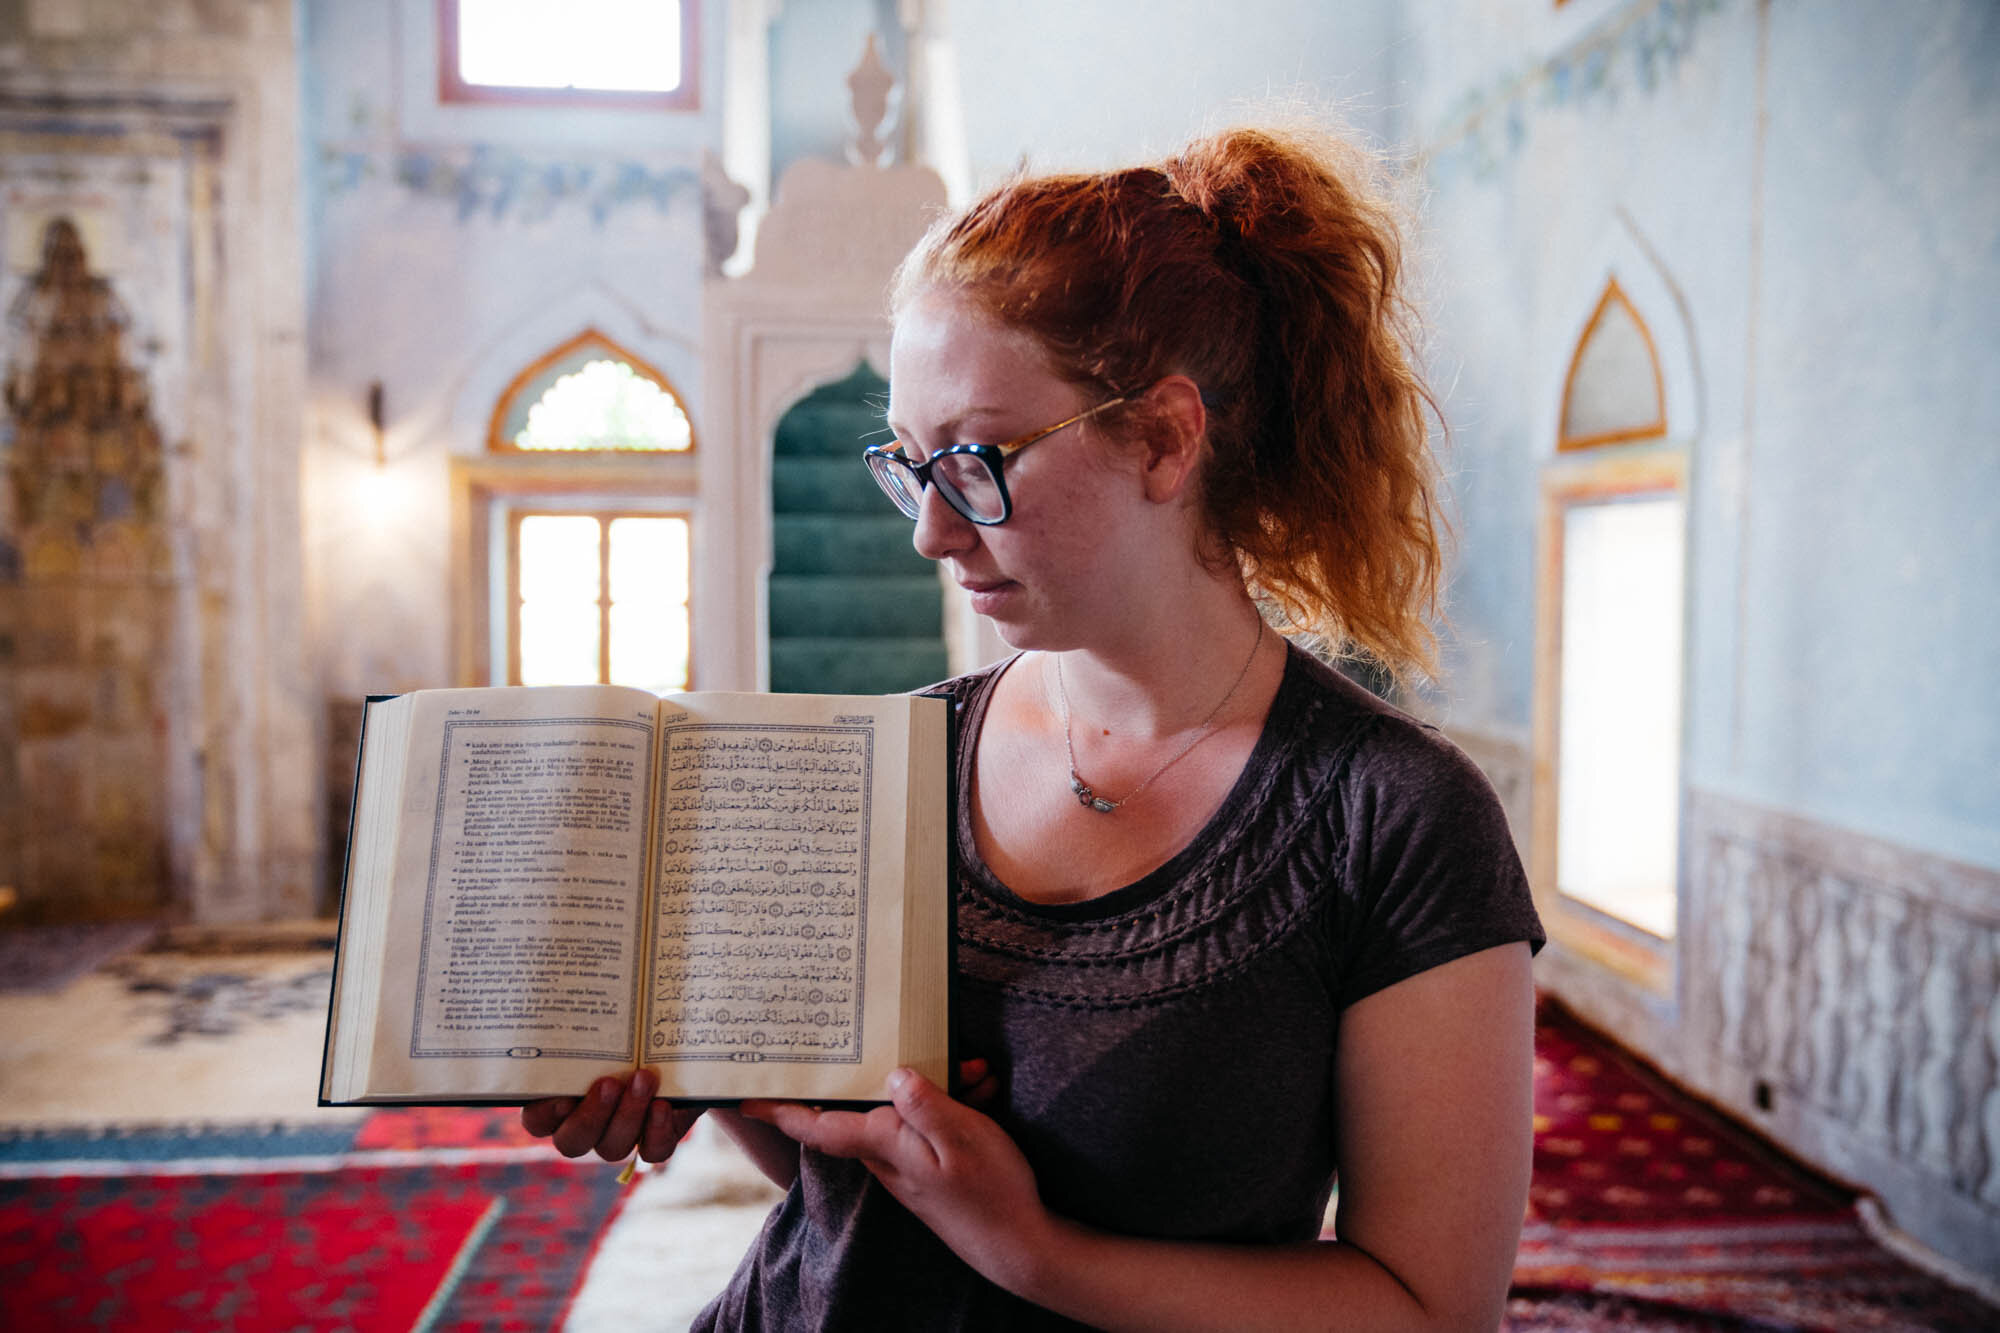  Ilma showing me a Quran in both Bosnian and Arabic language 